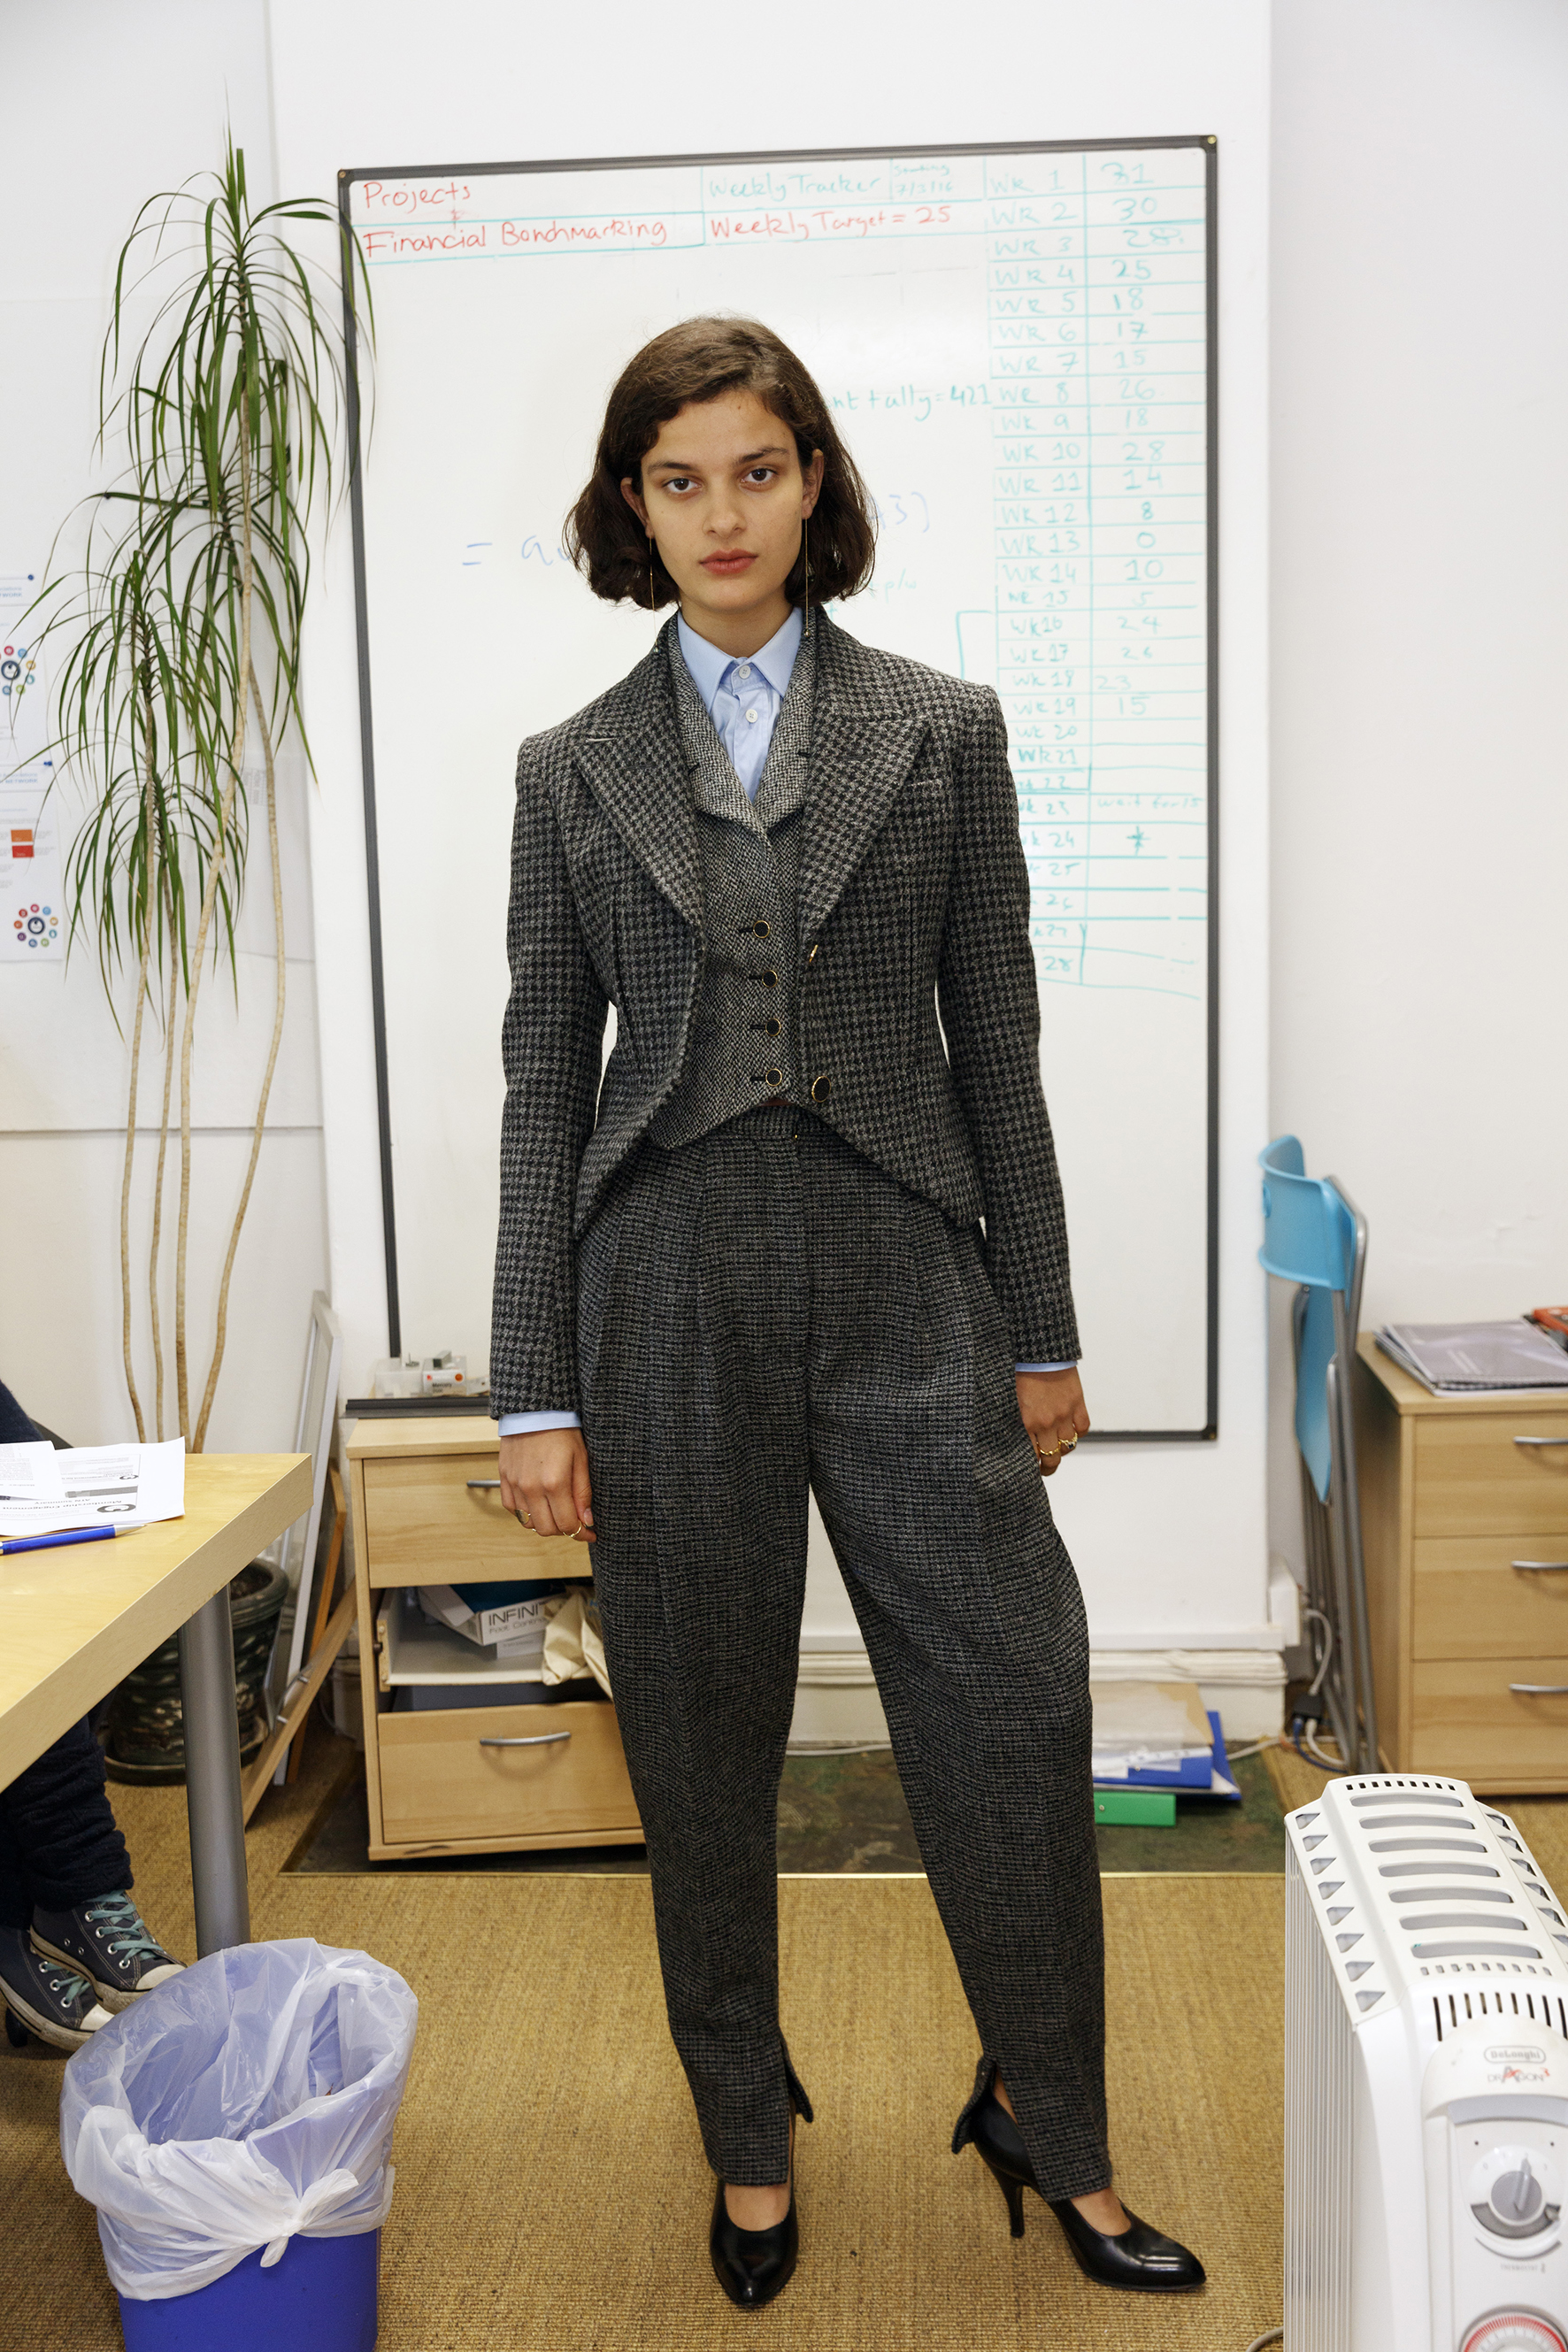  Houndstooth checked wool jacket, waistcoat and high waisted tailored pants HILLIER BARTLEY,&nbsp;popeline shirt BALENCIAGA,&nbsp;vintage pumps FRANCO JACASSI VINTAGE DELIRIUM,&nbsp;fine gold rings LAURA LEE JEWELLERY,&nbsp;silver ring FESWA,&nbsp;sa